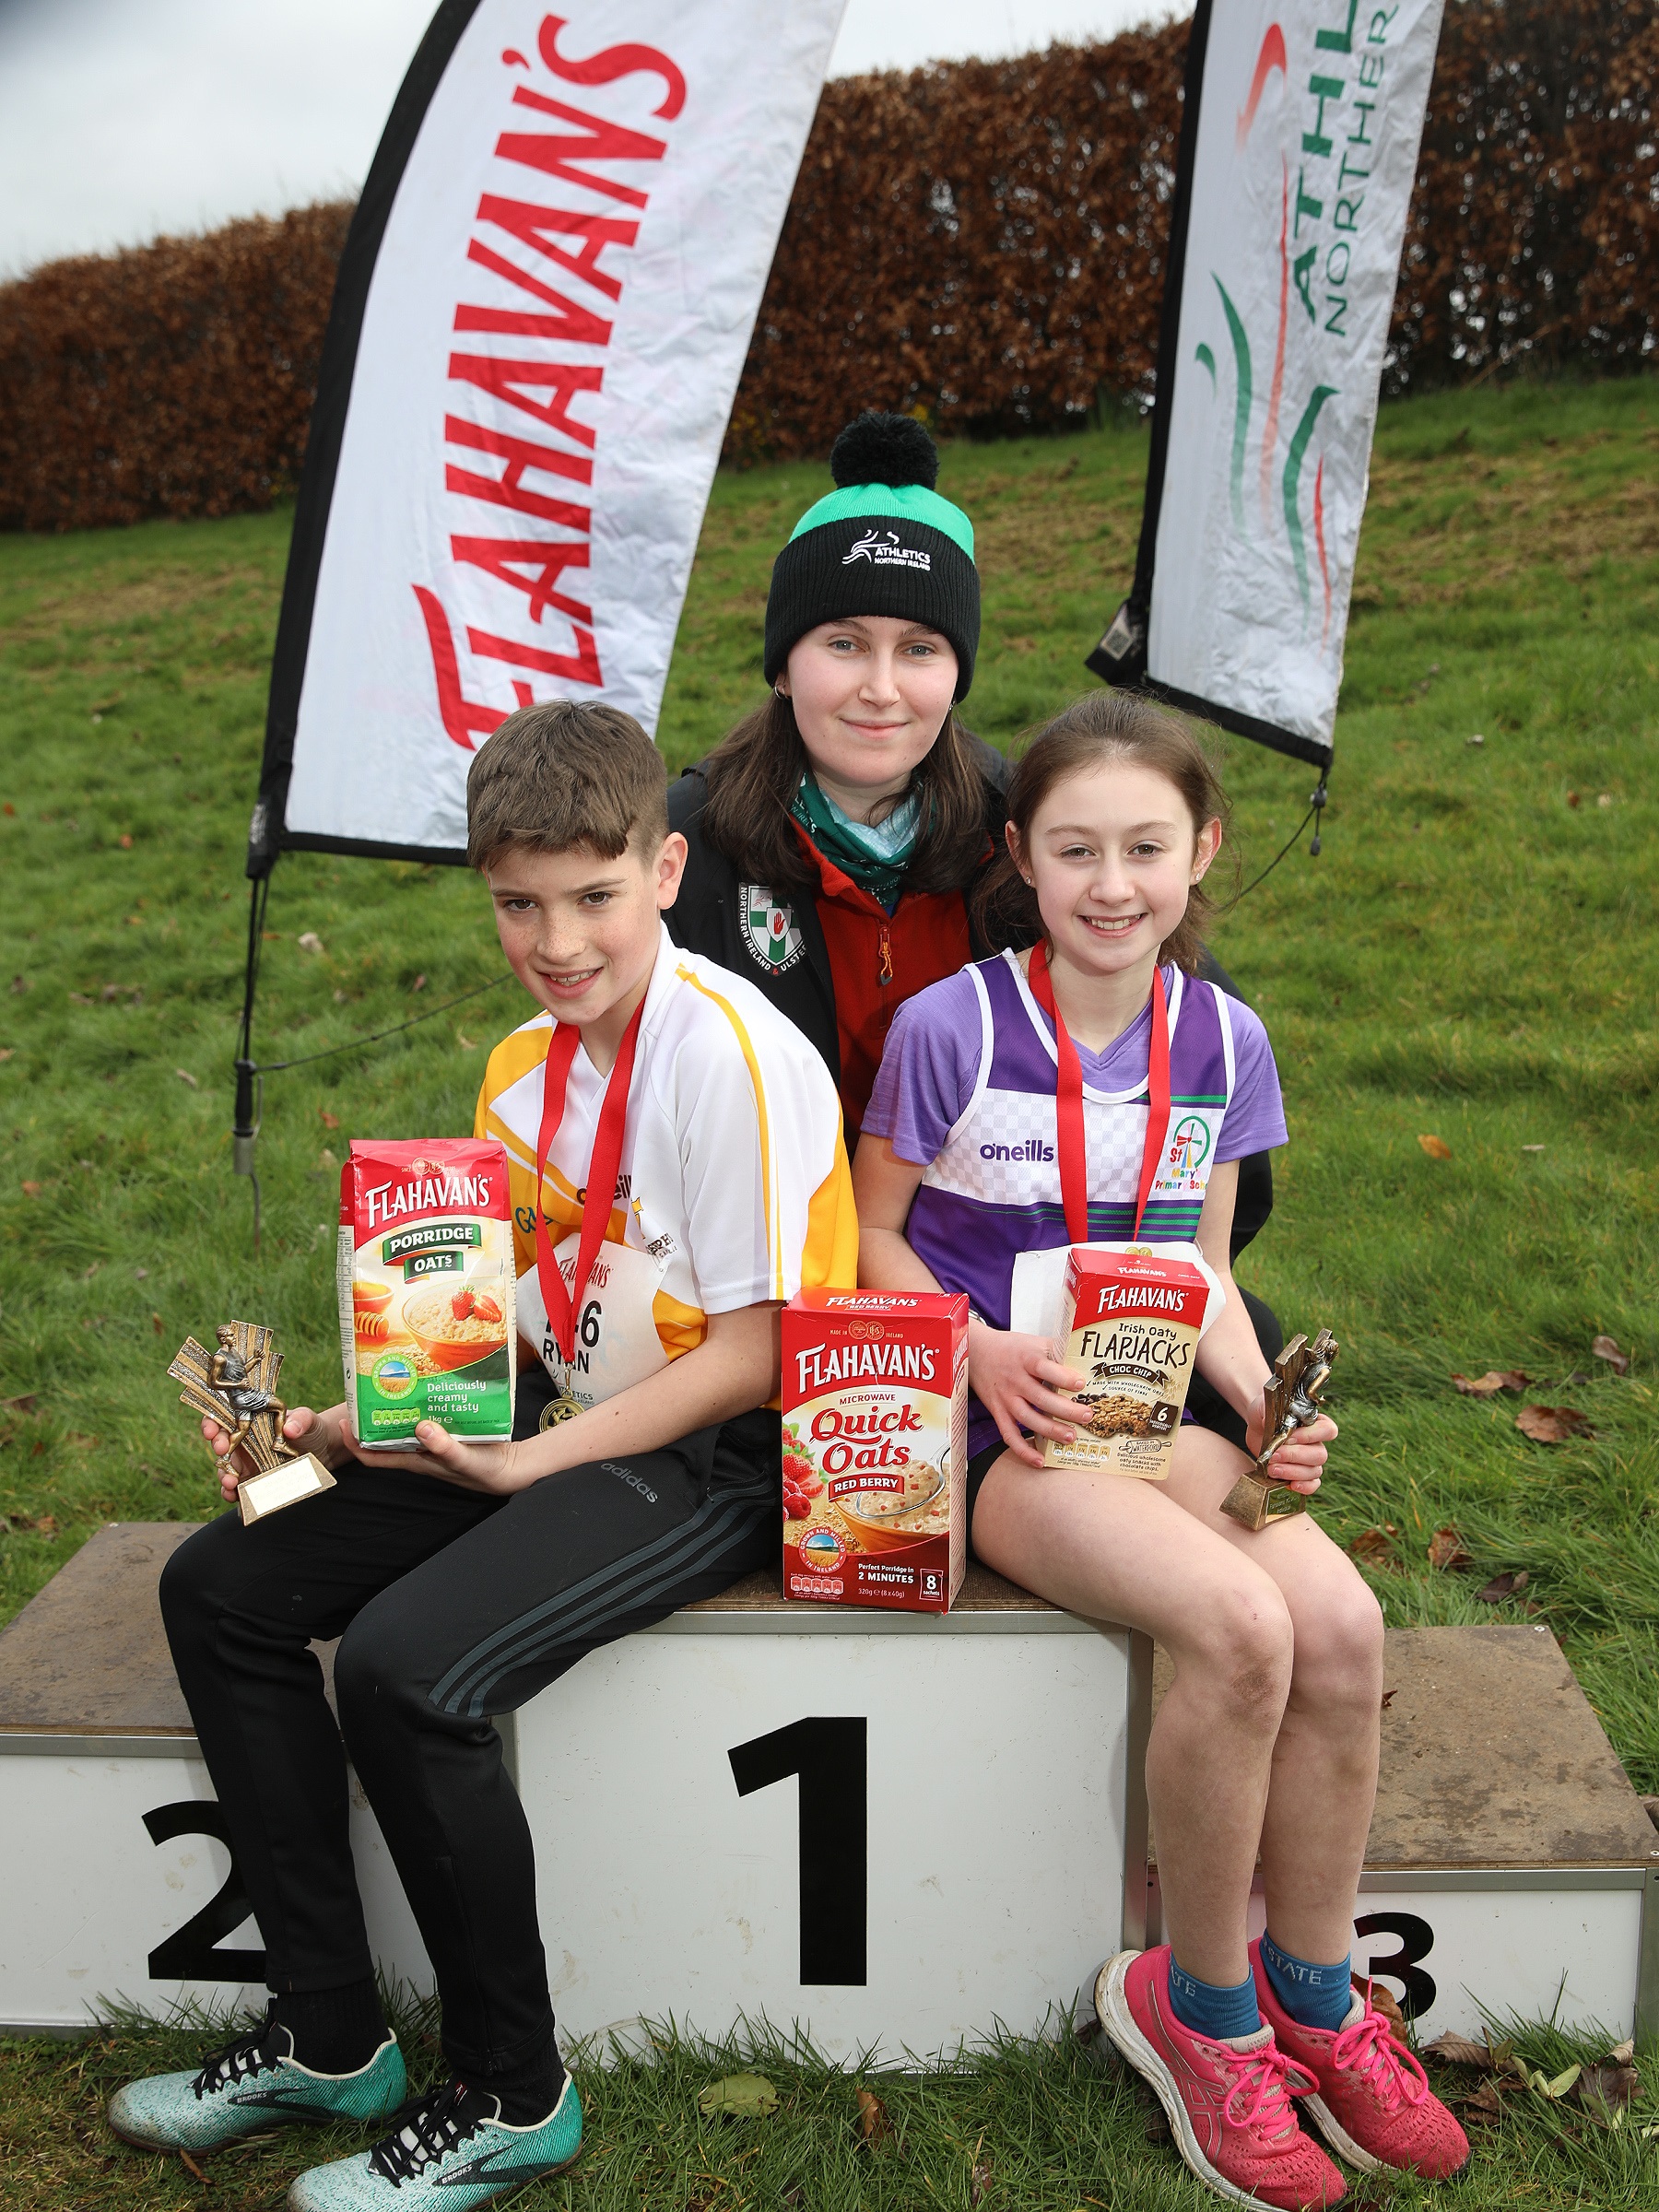 Flahavans Primary School Cross Country League Athletes Race to the Top